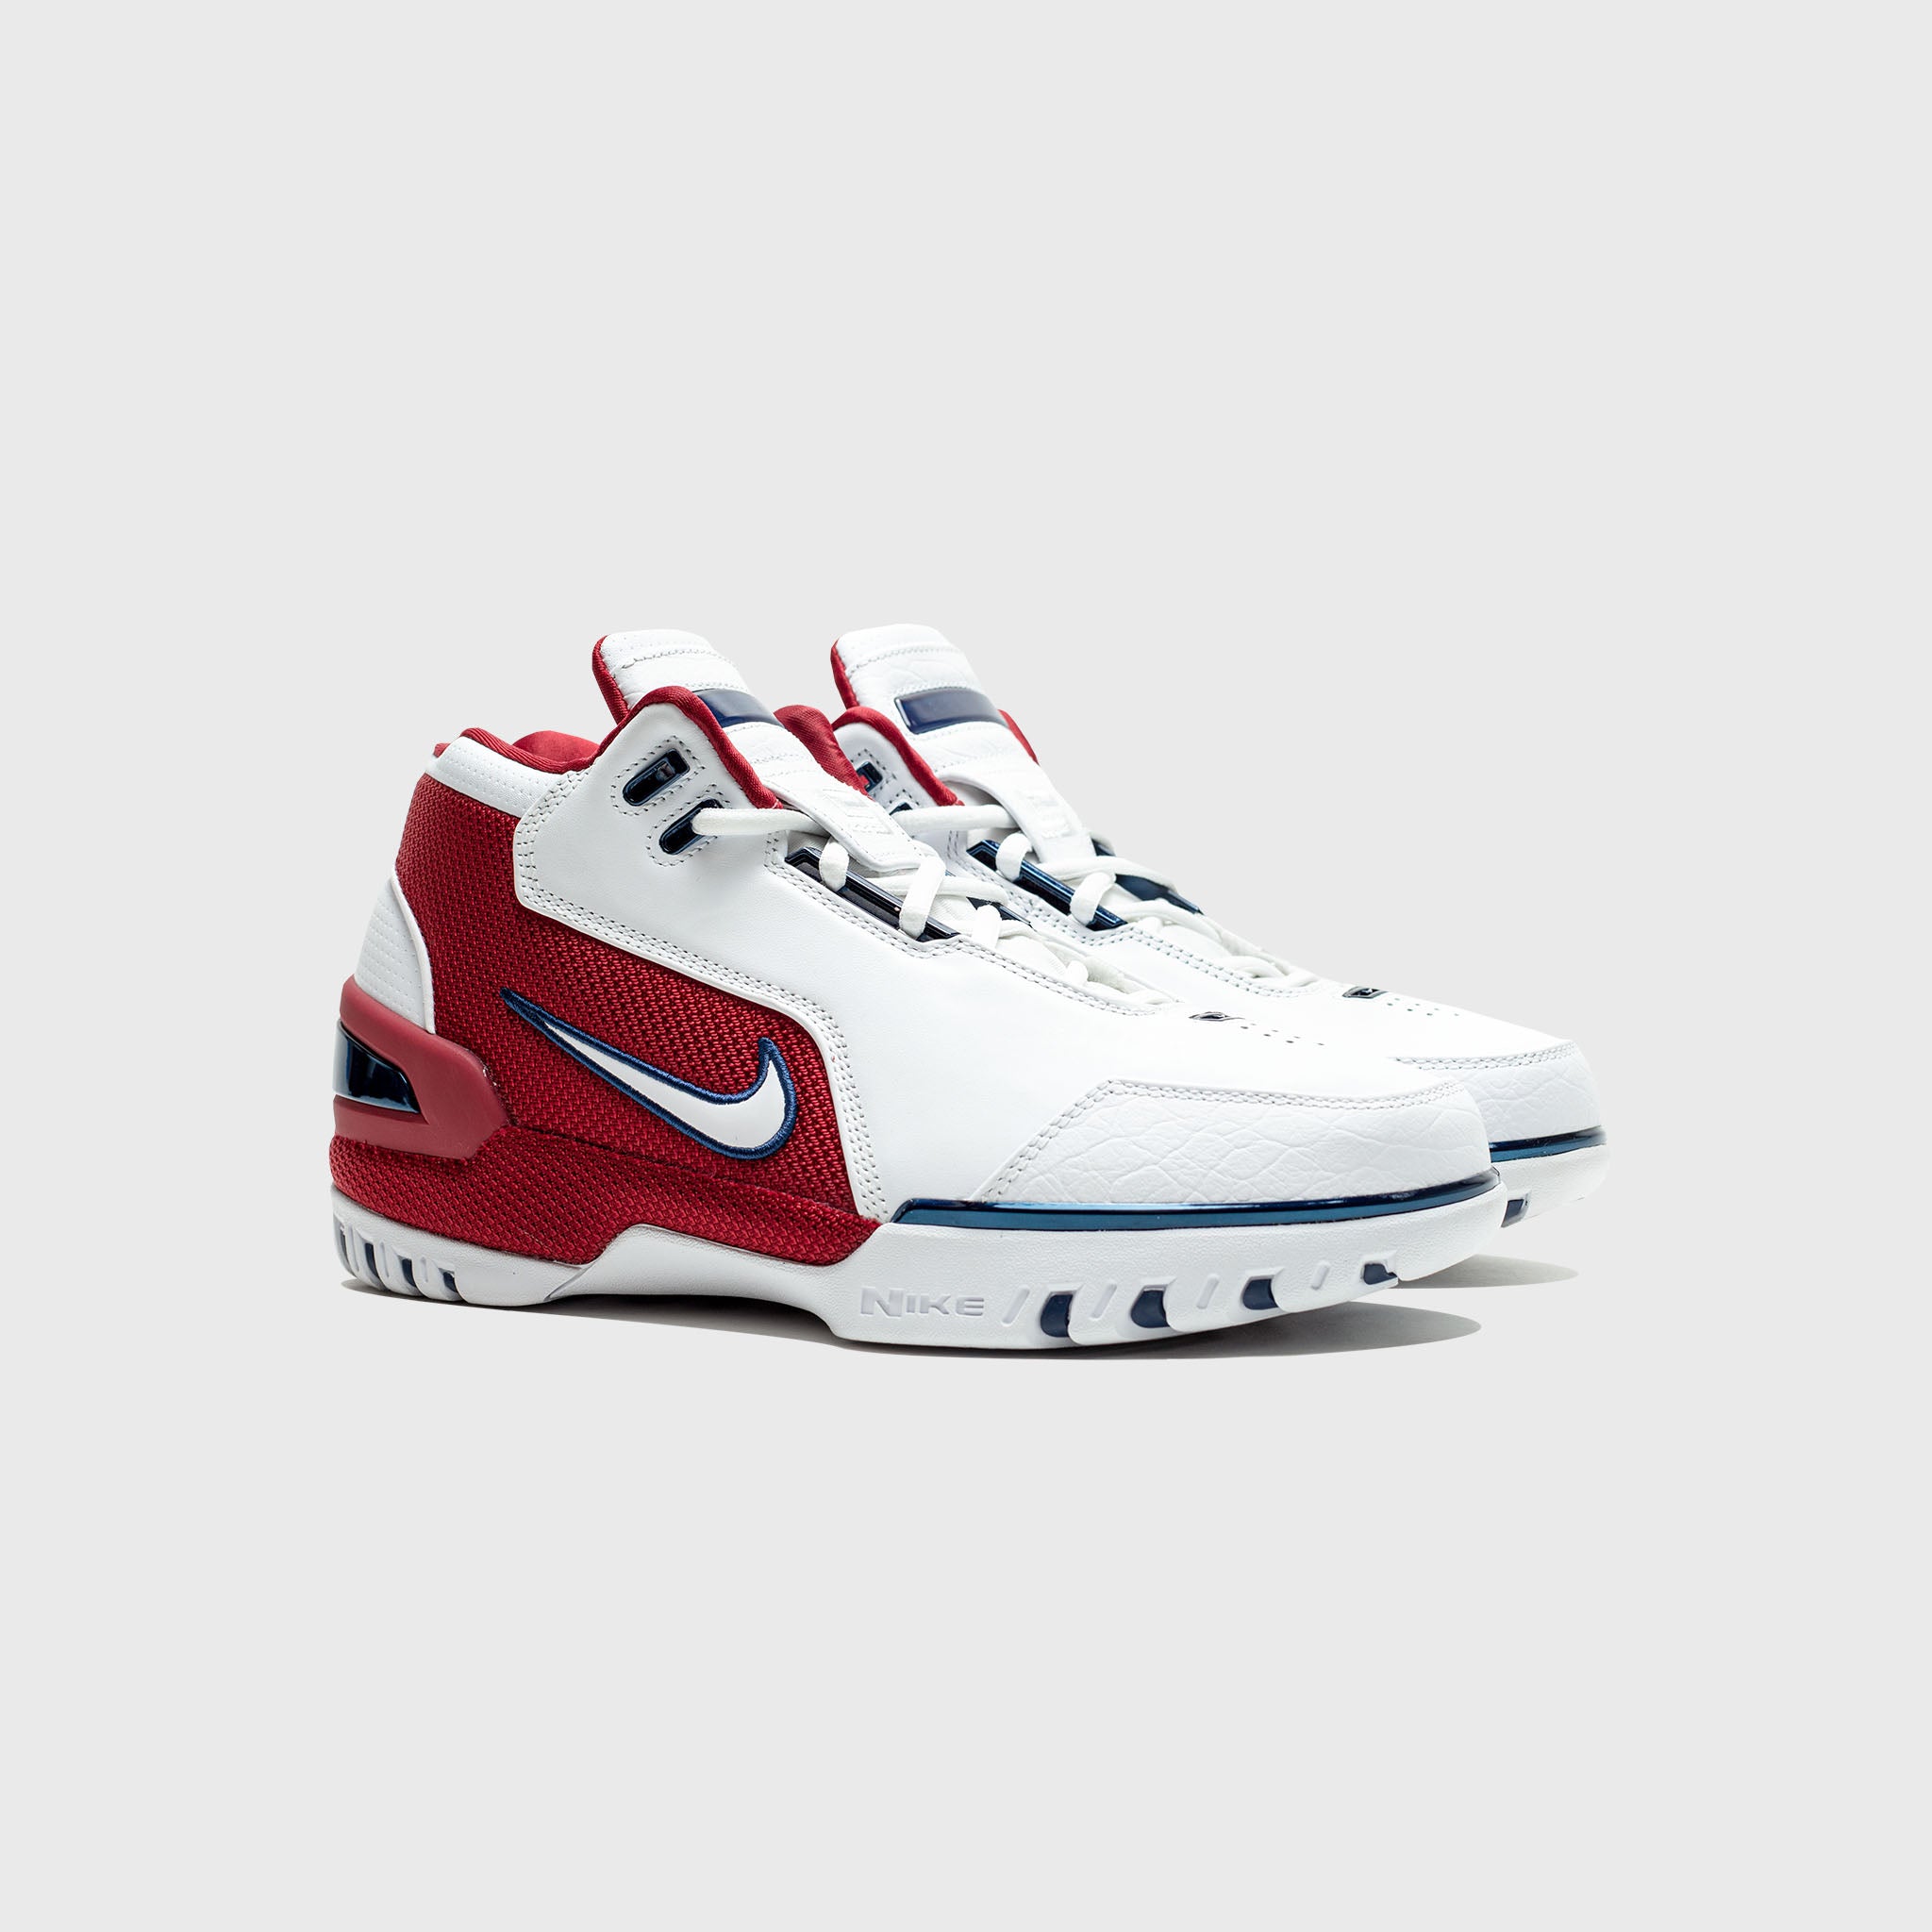 NIKE  AIRZOOMGENERATION FIRSTGAME DM7535 101 PROFILE a50105ca f2d7 45bb ad49 a91b1d054c90